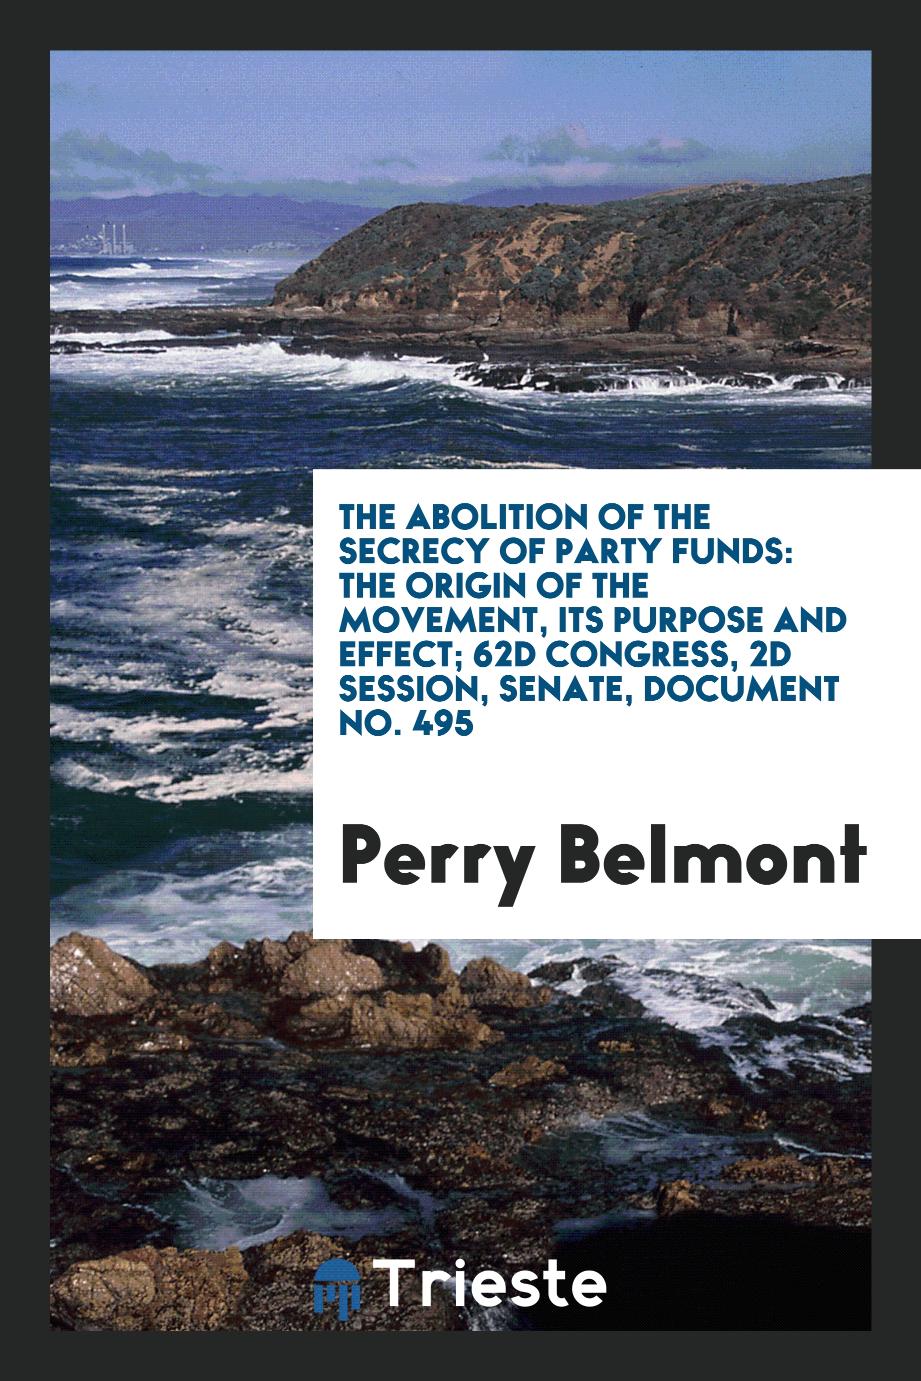 The Abolition of the Secrecy of Party Funds: The Origin of the Movement, Its Purpose and Effect; 62D congress, 2d session, senate, Document No. 495